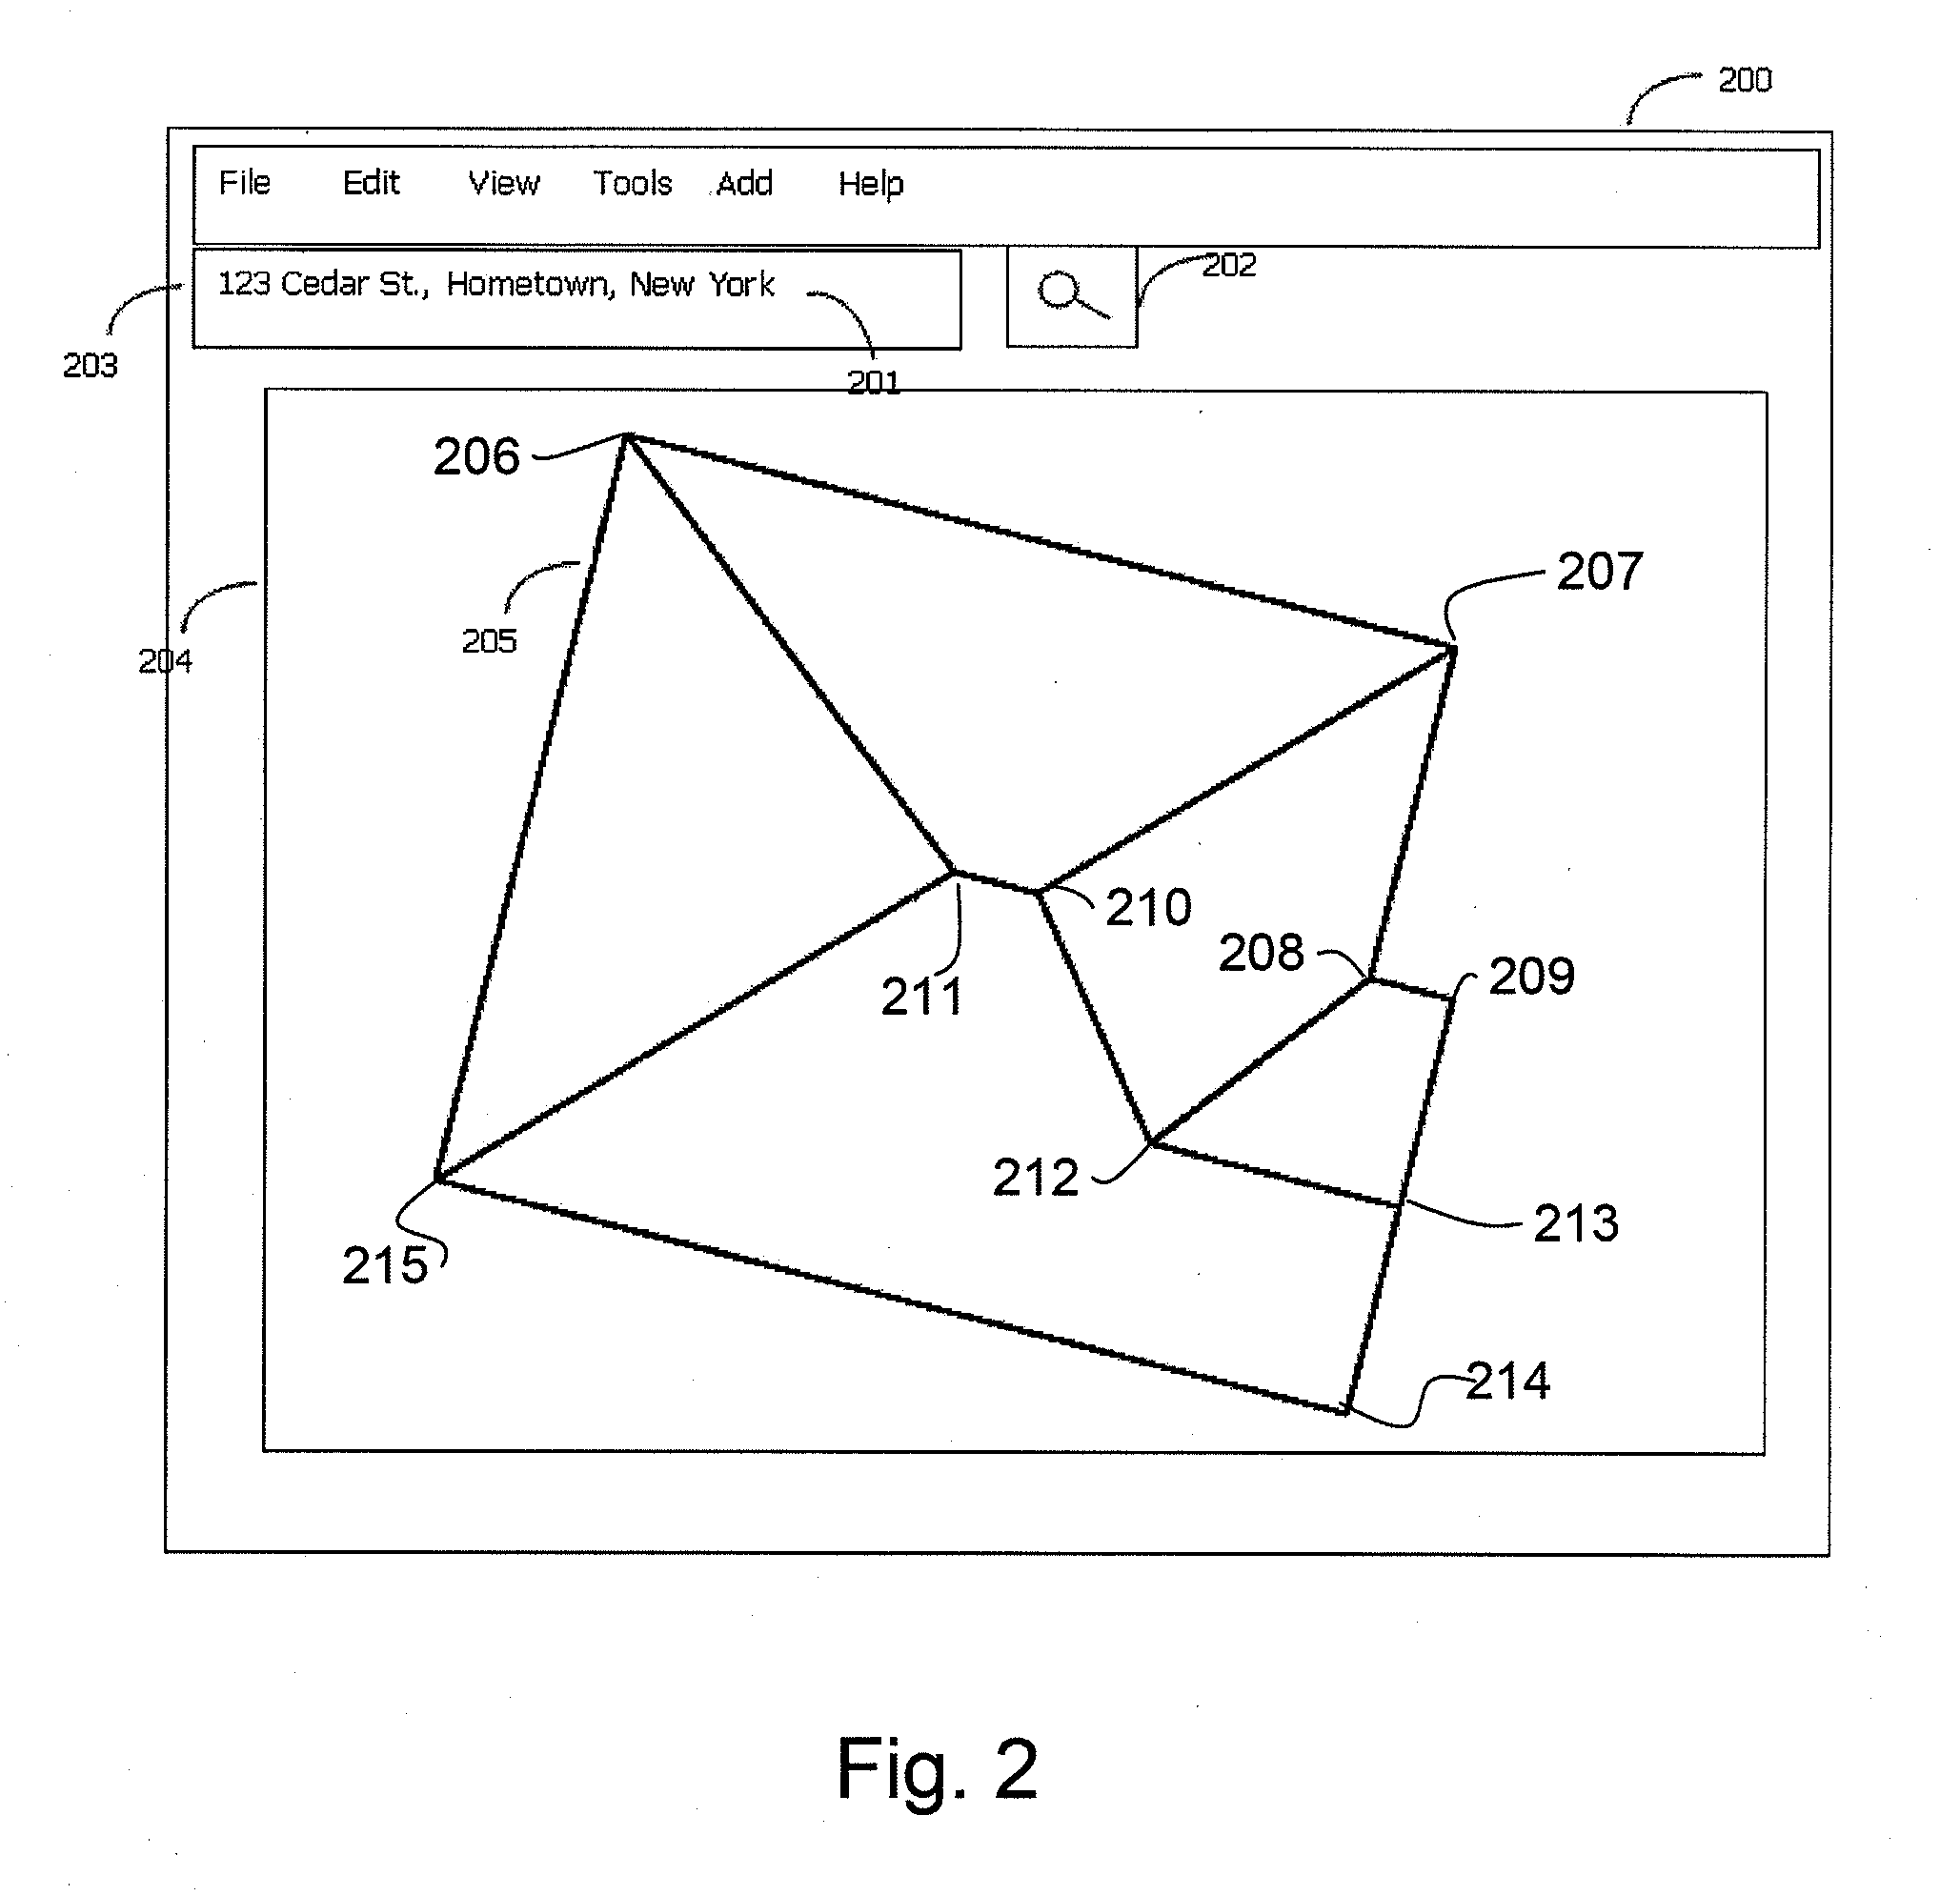 Method and System for Configuring Solar Energy Systems